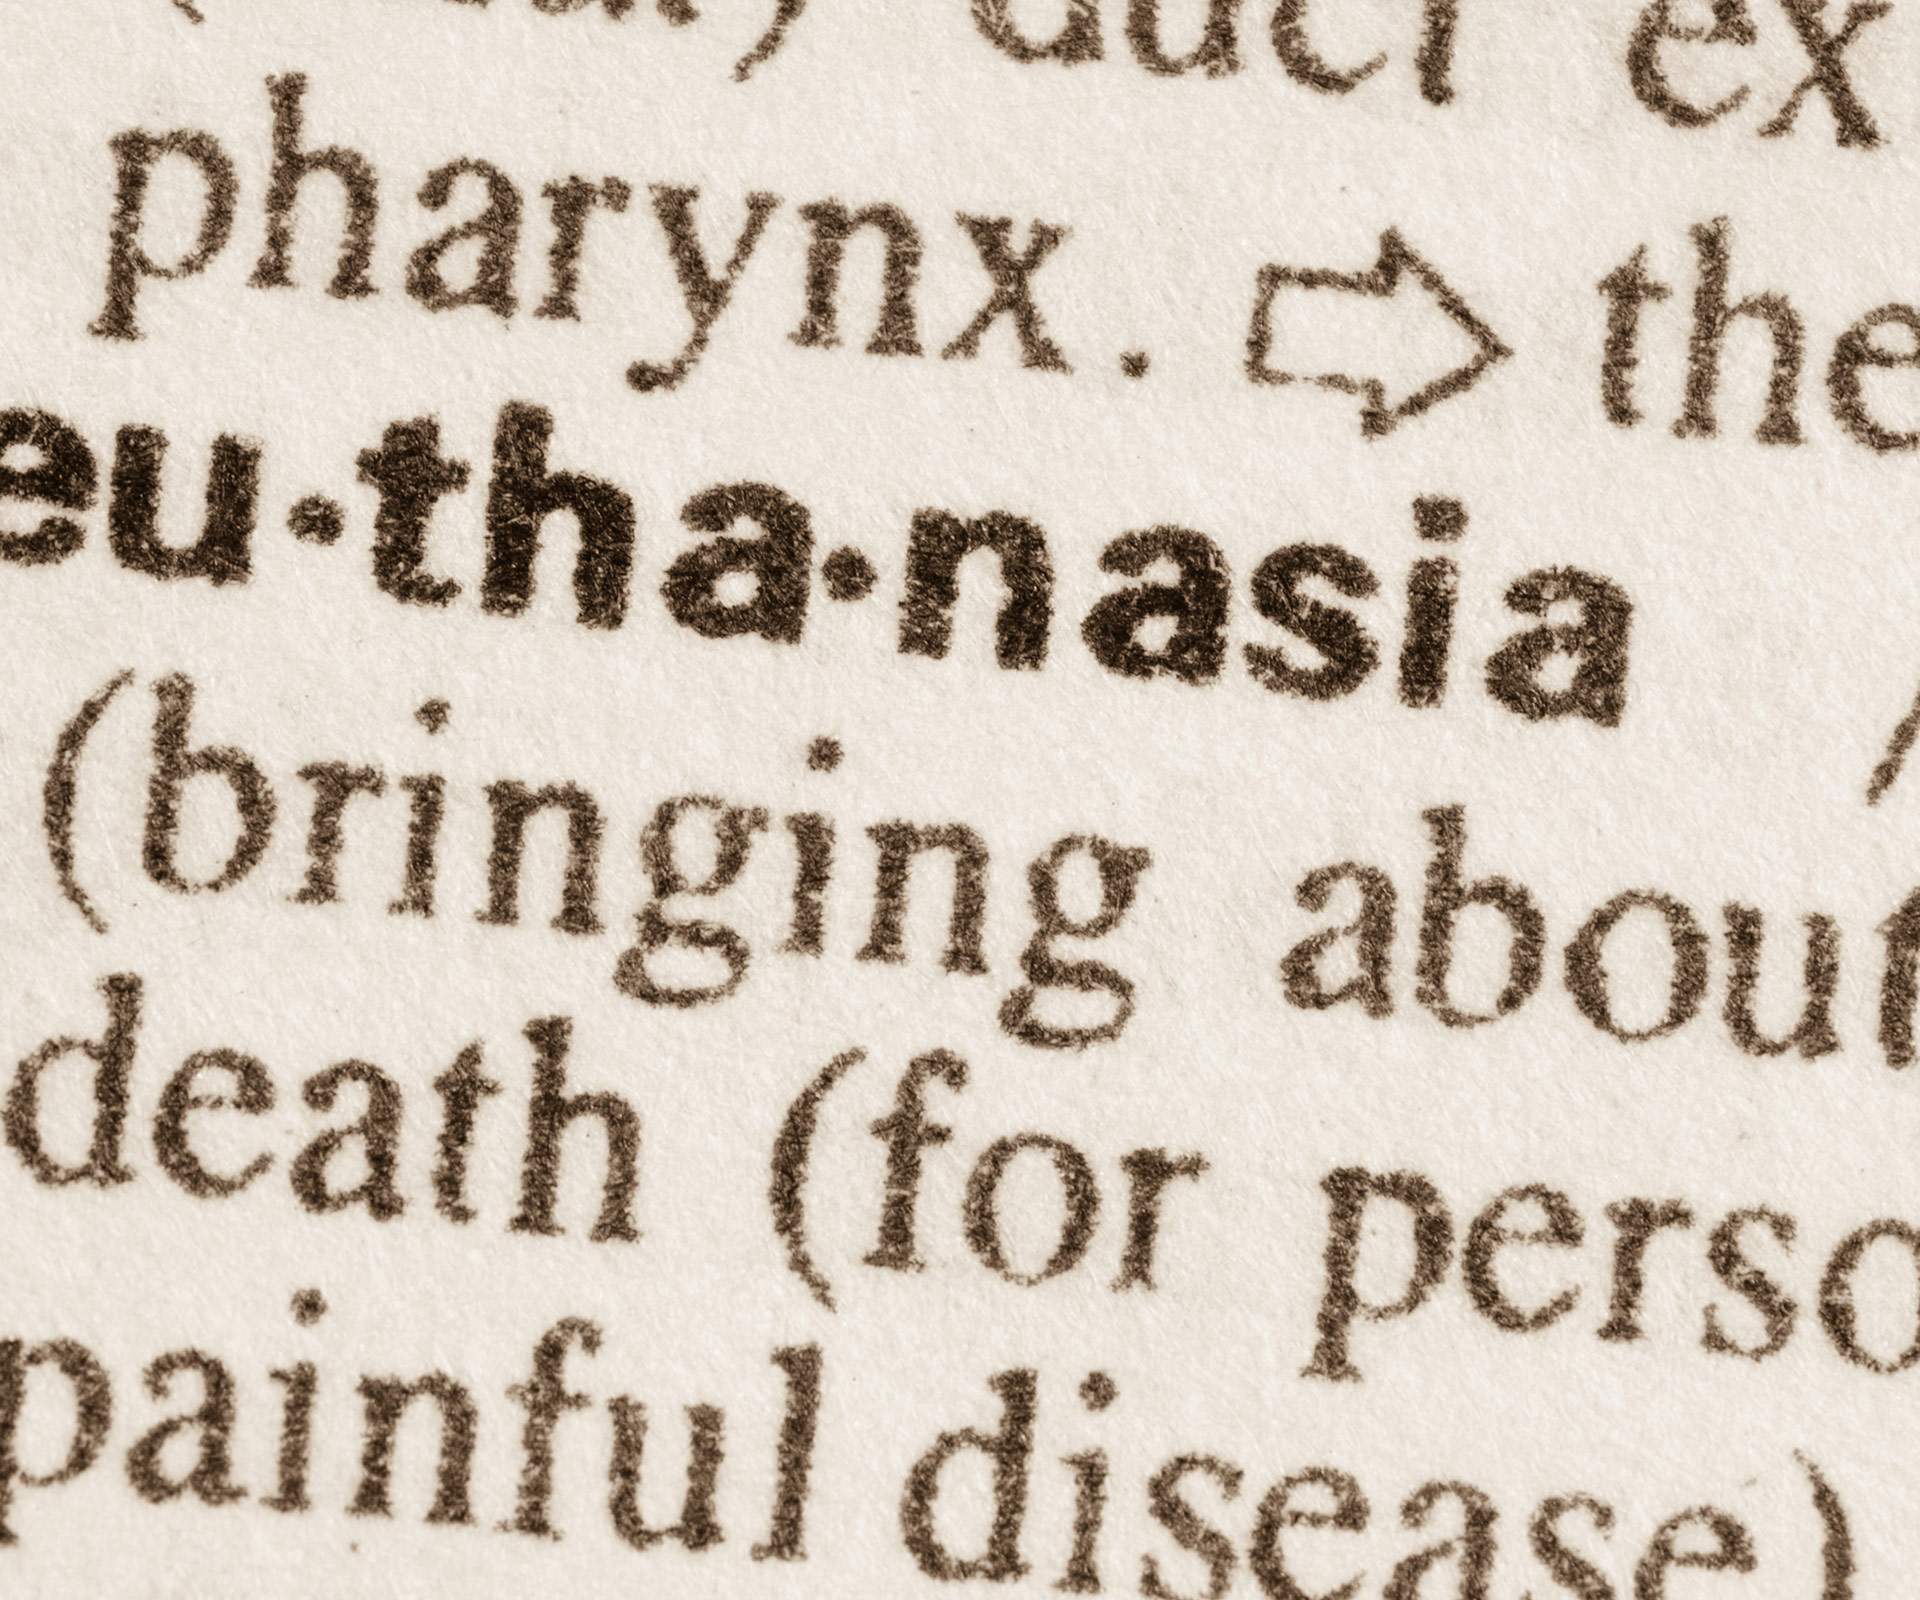 Death with Dignity: Euthanasia bill fails in SA parliament for the 15th time